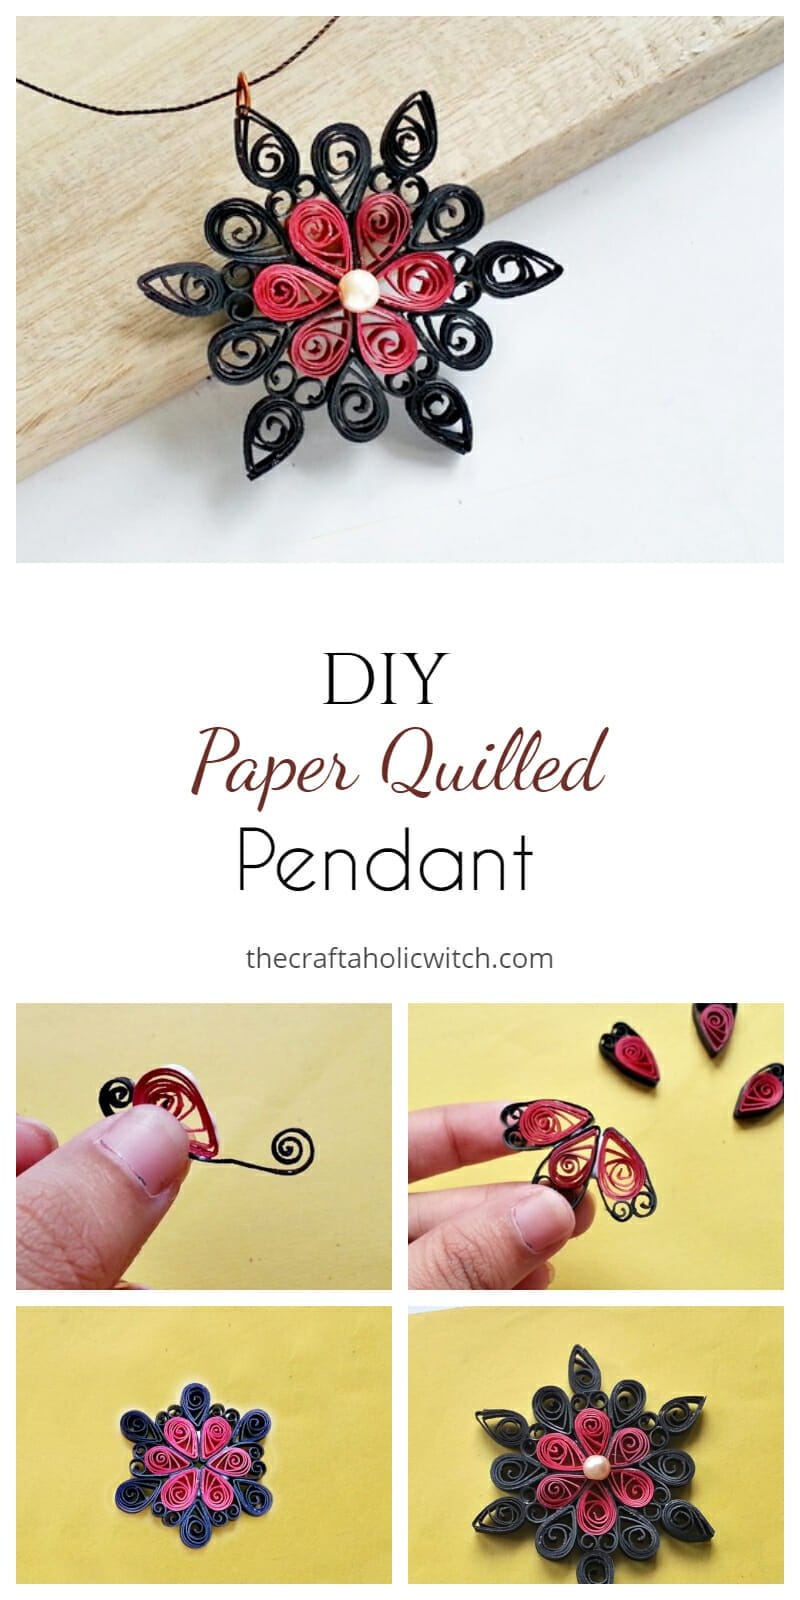 quilled pendant pin image - DIY Paper Quilled Pendant